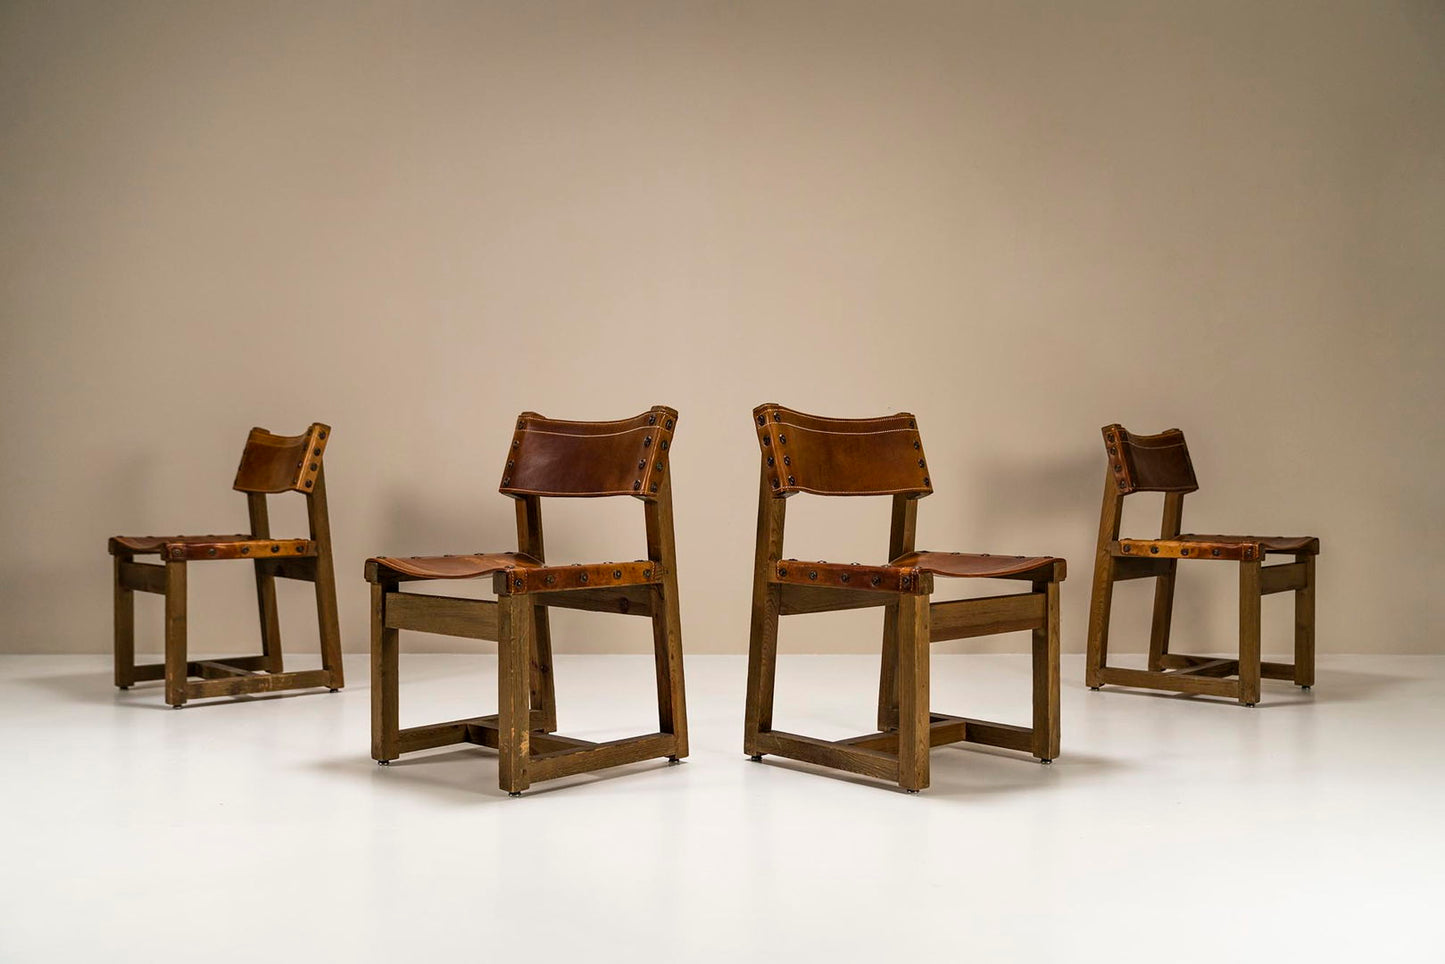 Biosca Set Of 4 Chairs In Pine And Cognac Saddle Leather, Spain 1960s